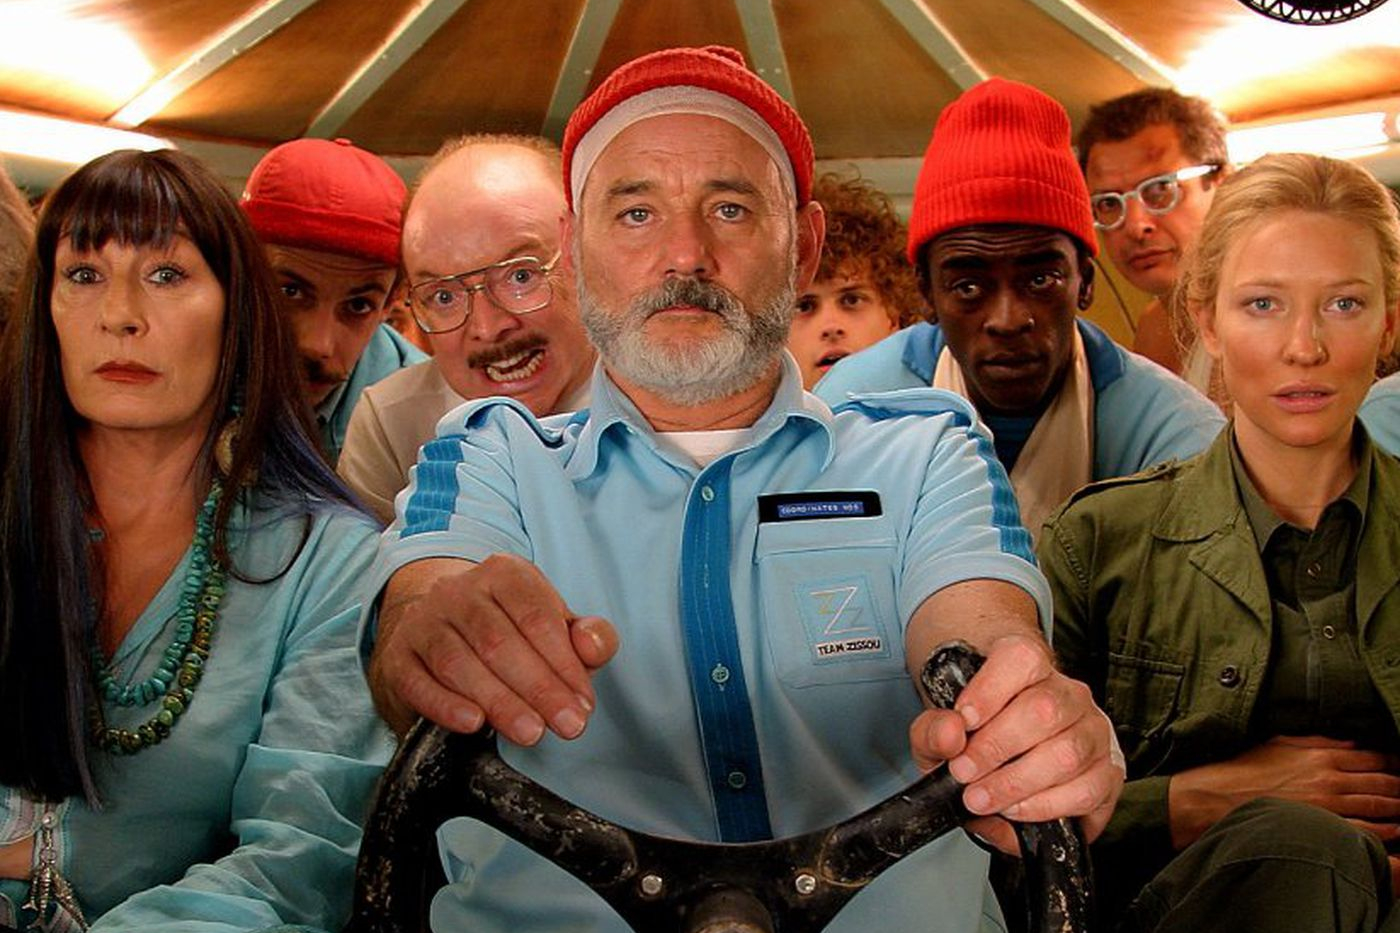 Wes Anderson Movies Ranked from Worst to Best